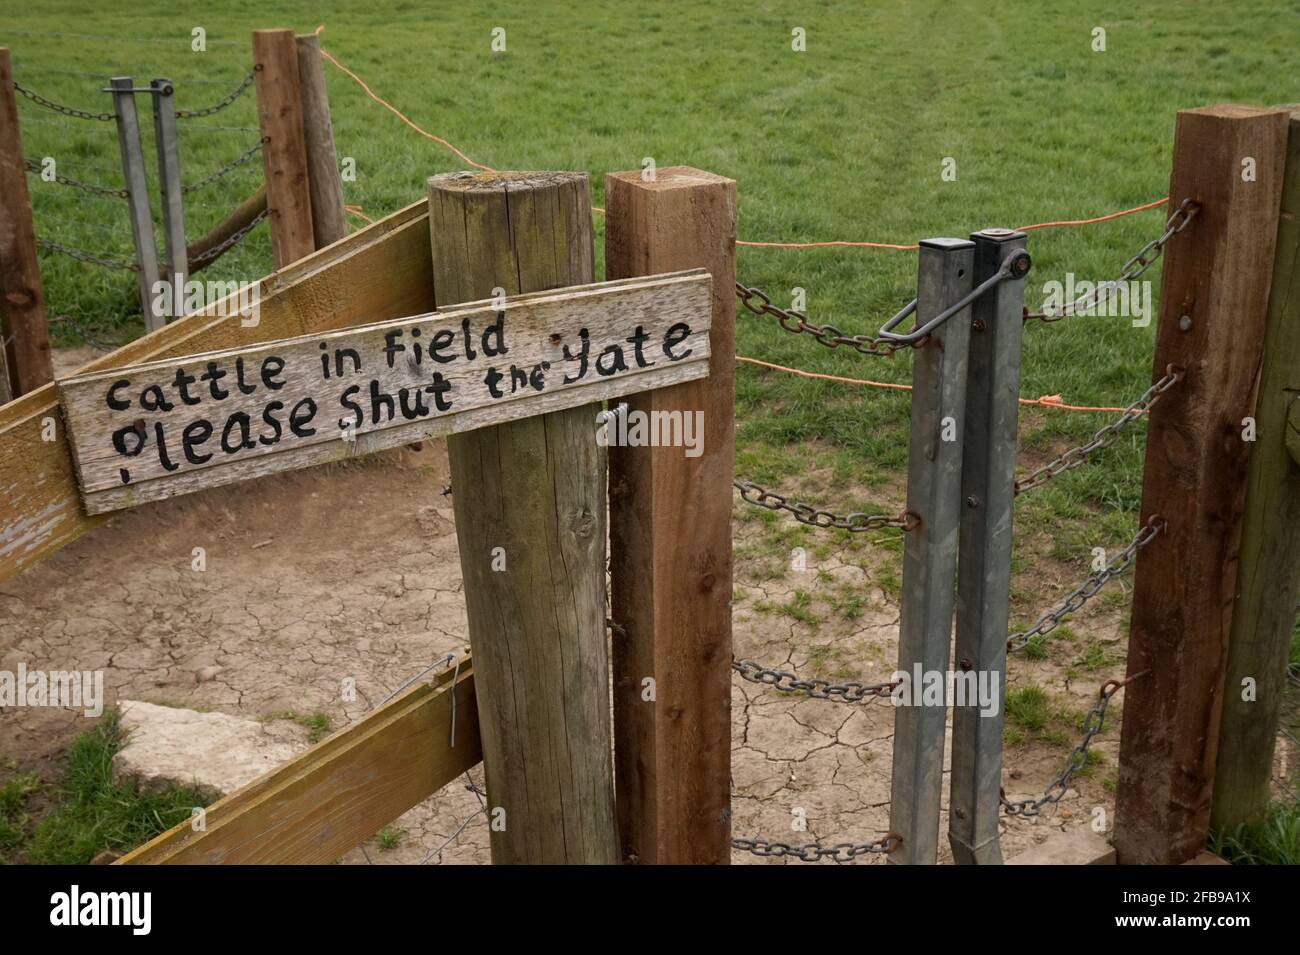 A sign on a gate says 'Cattle in field, please shut the gate', Cambridgeshire, England Stock Photo